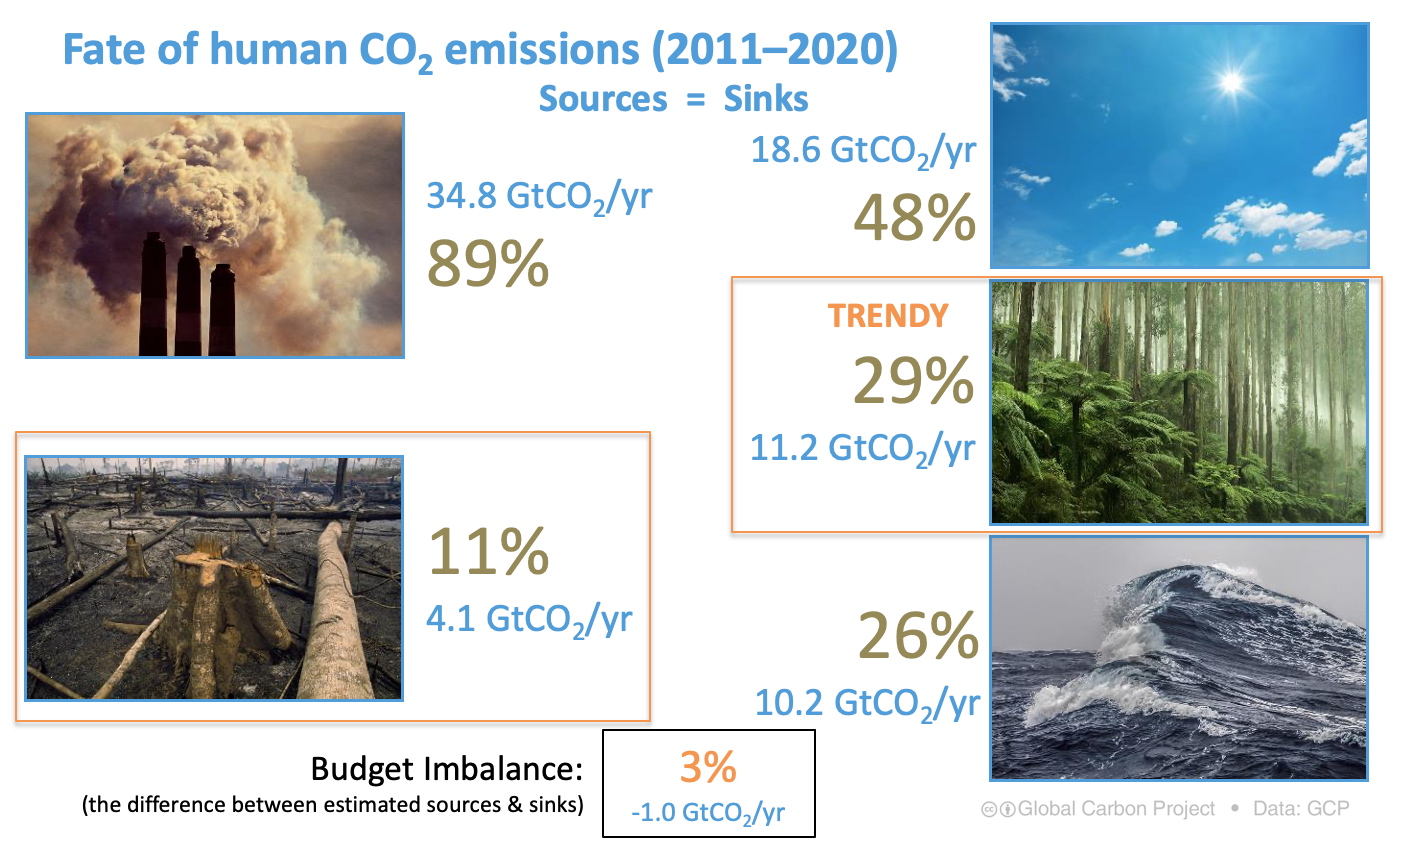 TRENDY: Trends in the land carbon cycle